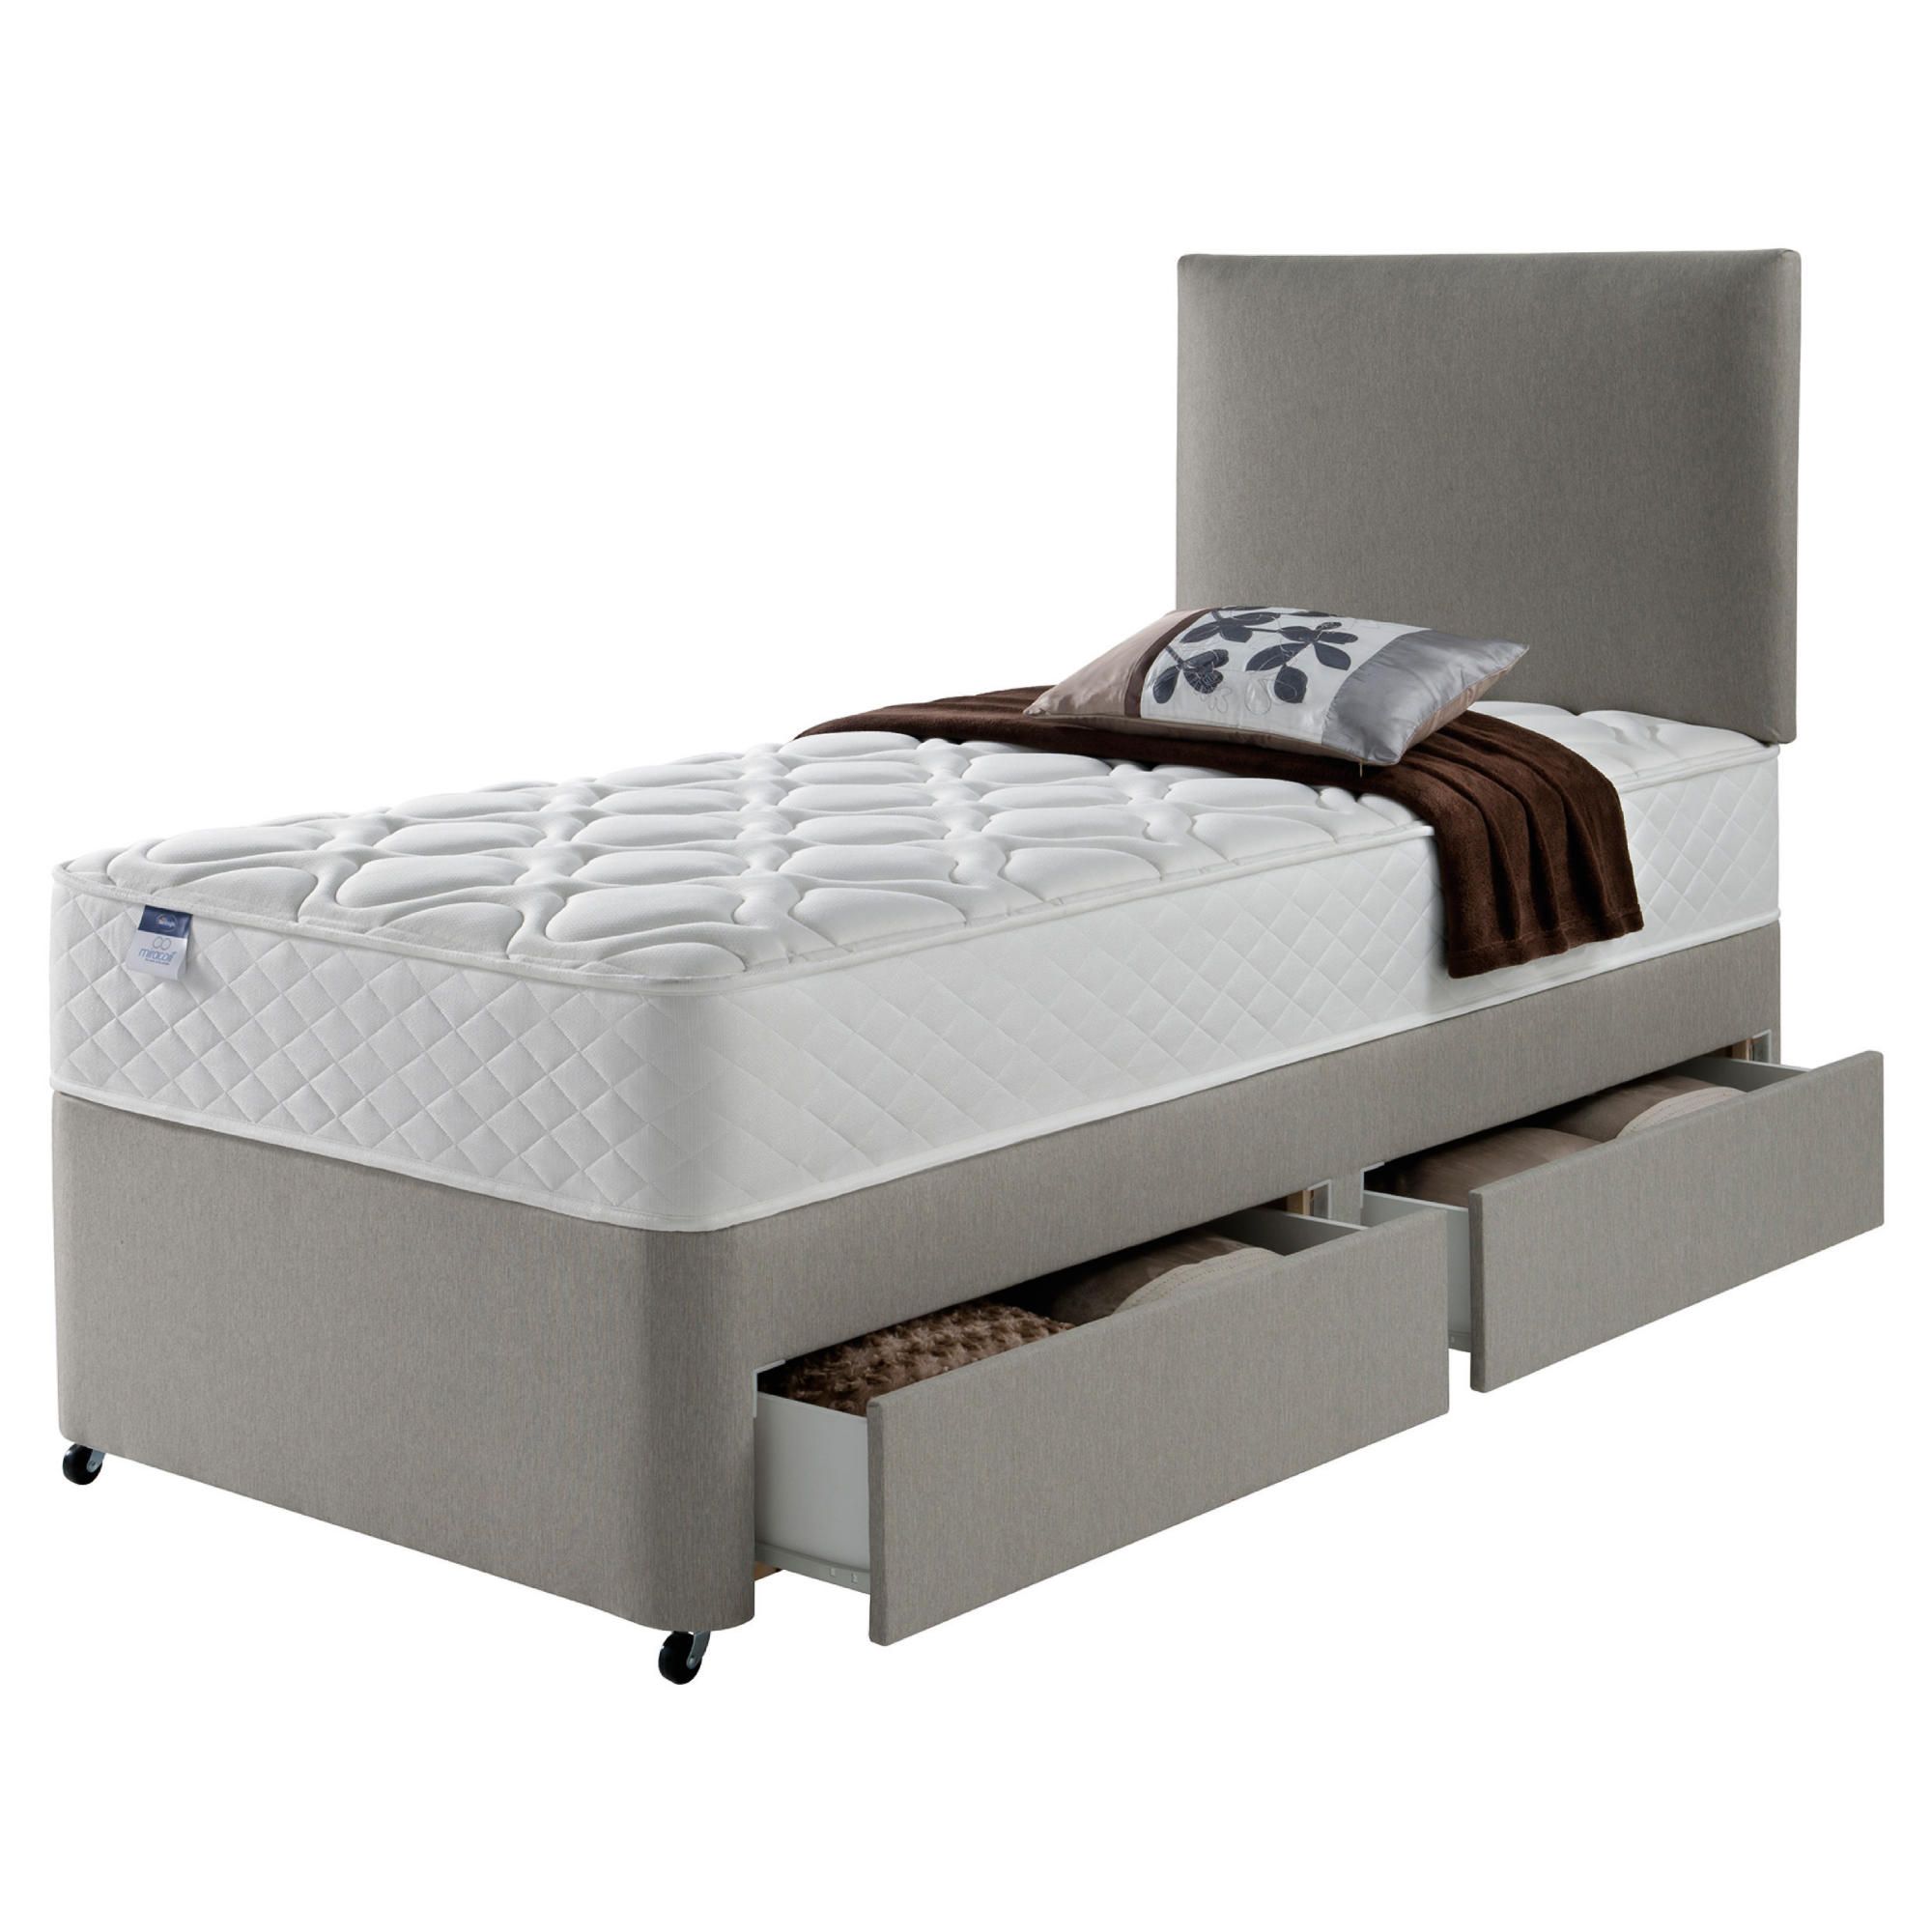 Silentnight Miracoil Luxury Micro Quilt 2 Drawer Single Divan Mink with Headboard at Tesco Direct